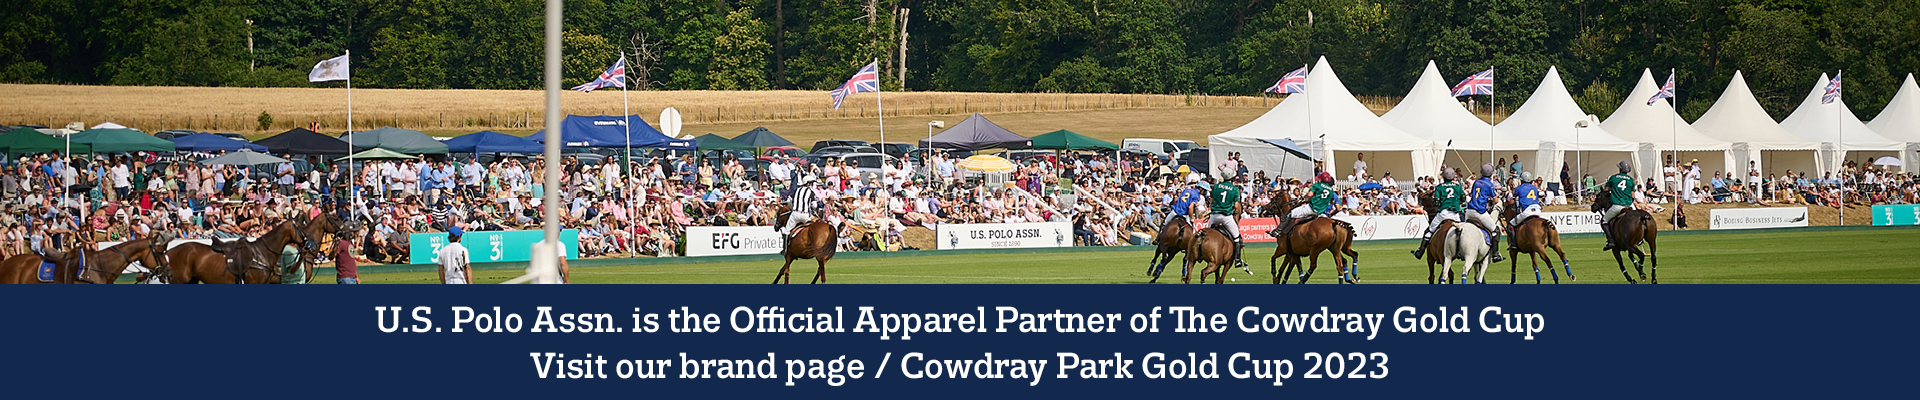 U.S. Polo Assn. is the Official Apparel Partner of The Cowdray Gold Cup Visit our brand page / Cowdray Park Gold Cup 2023